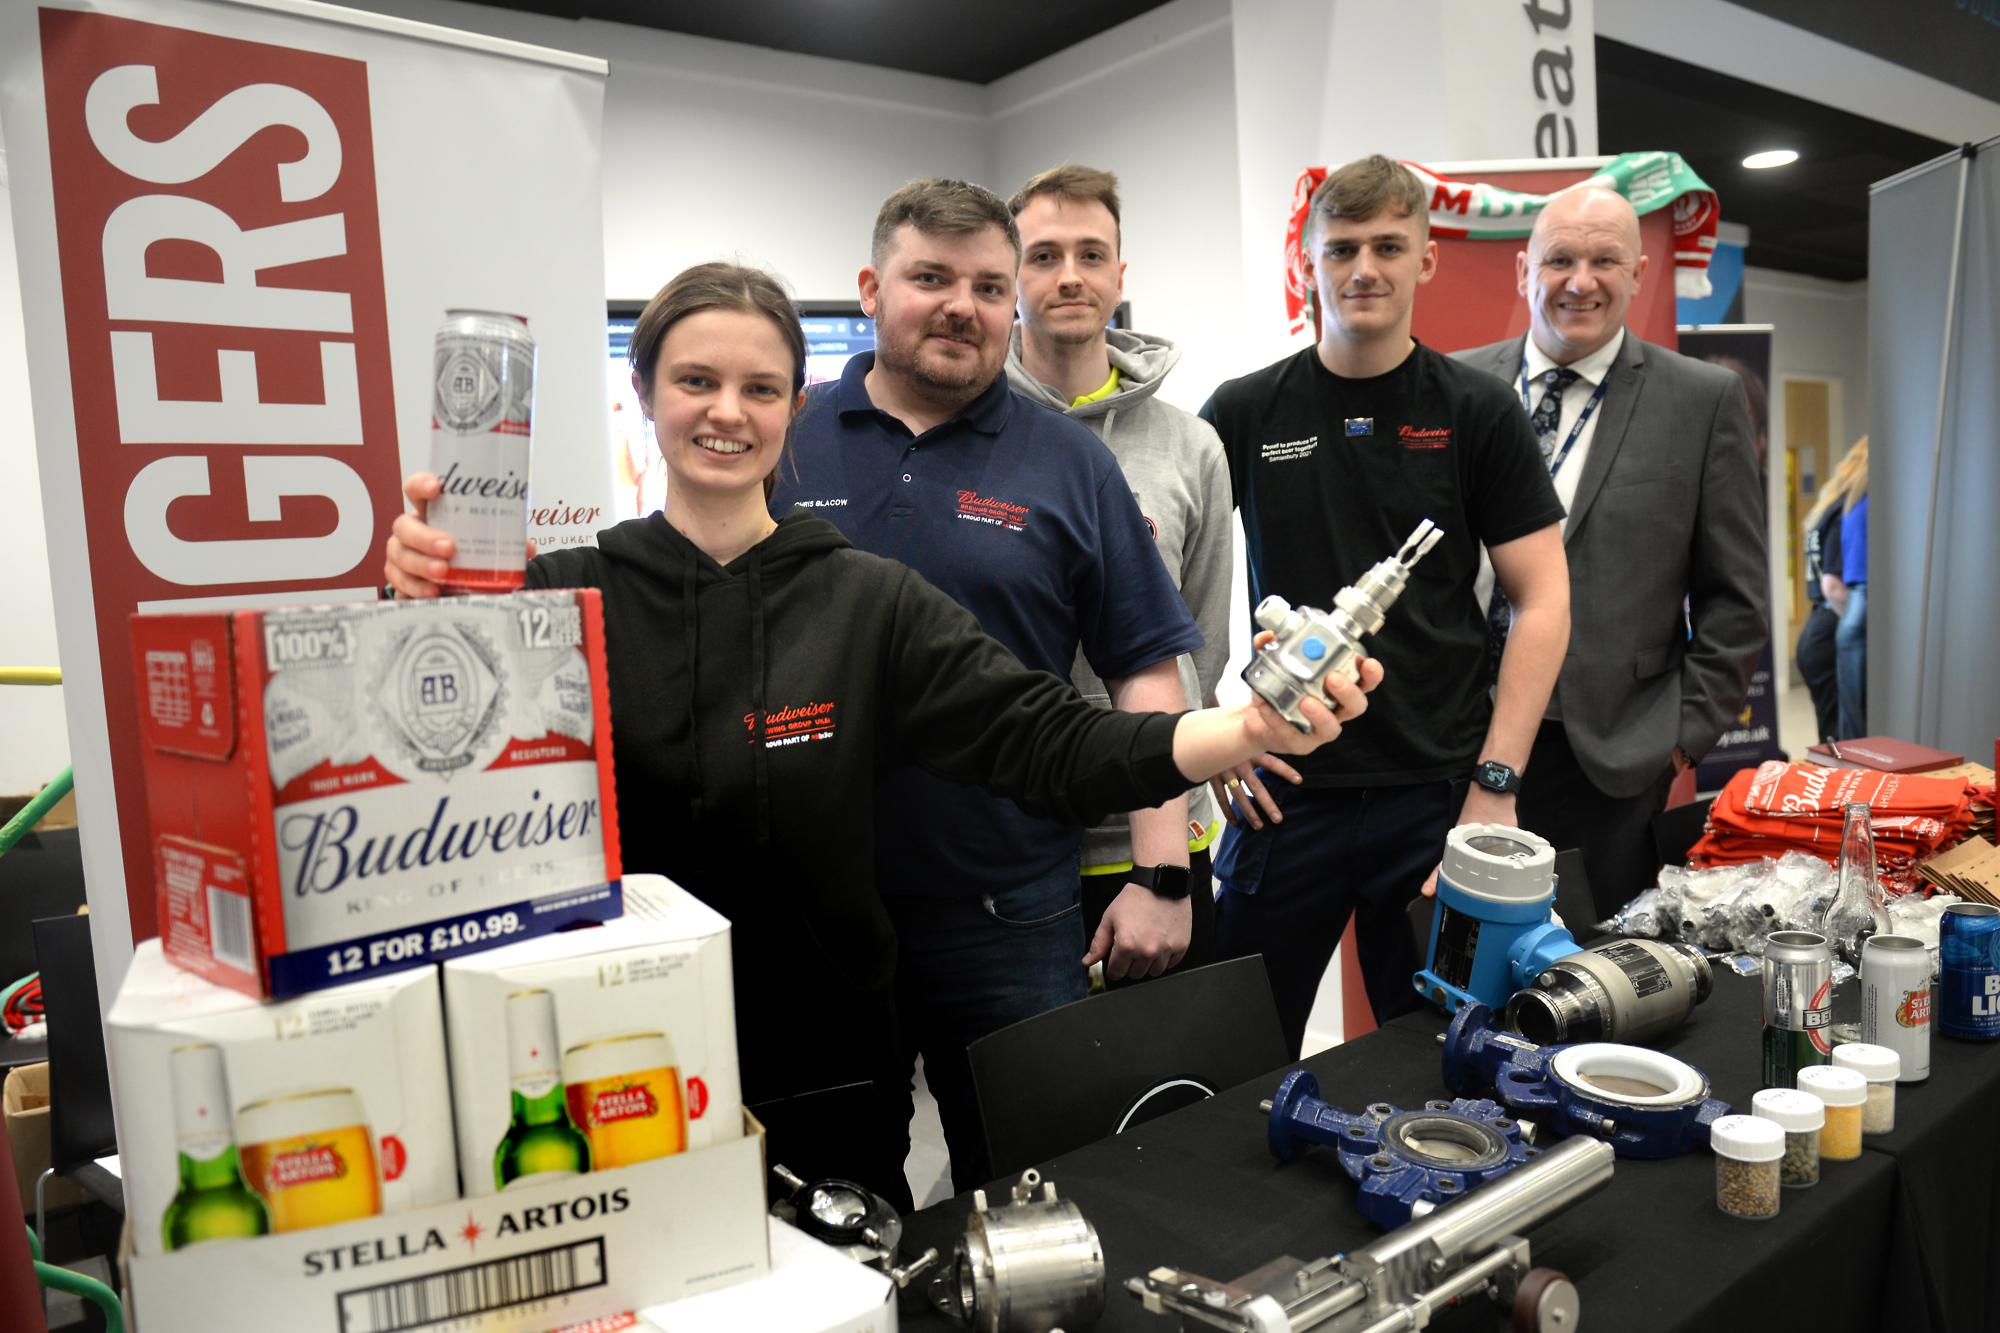 Staff from Budweiser join Neil Burrows at the Themis